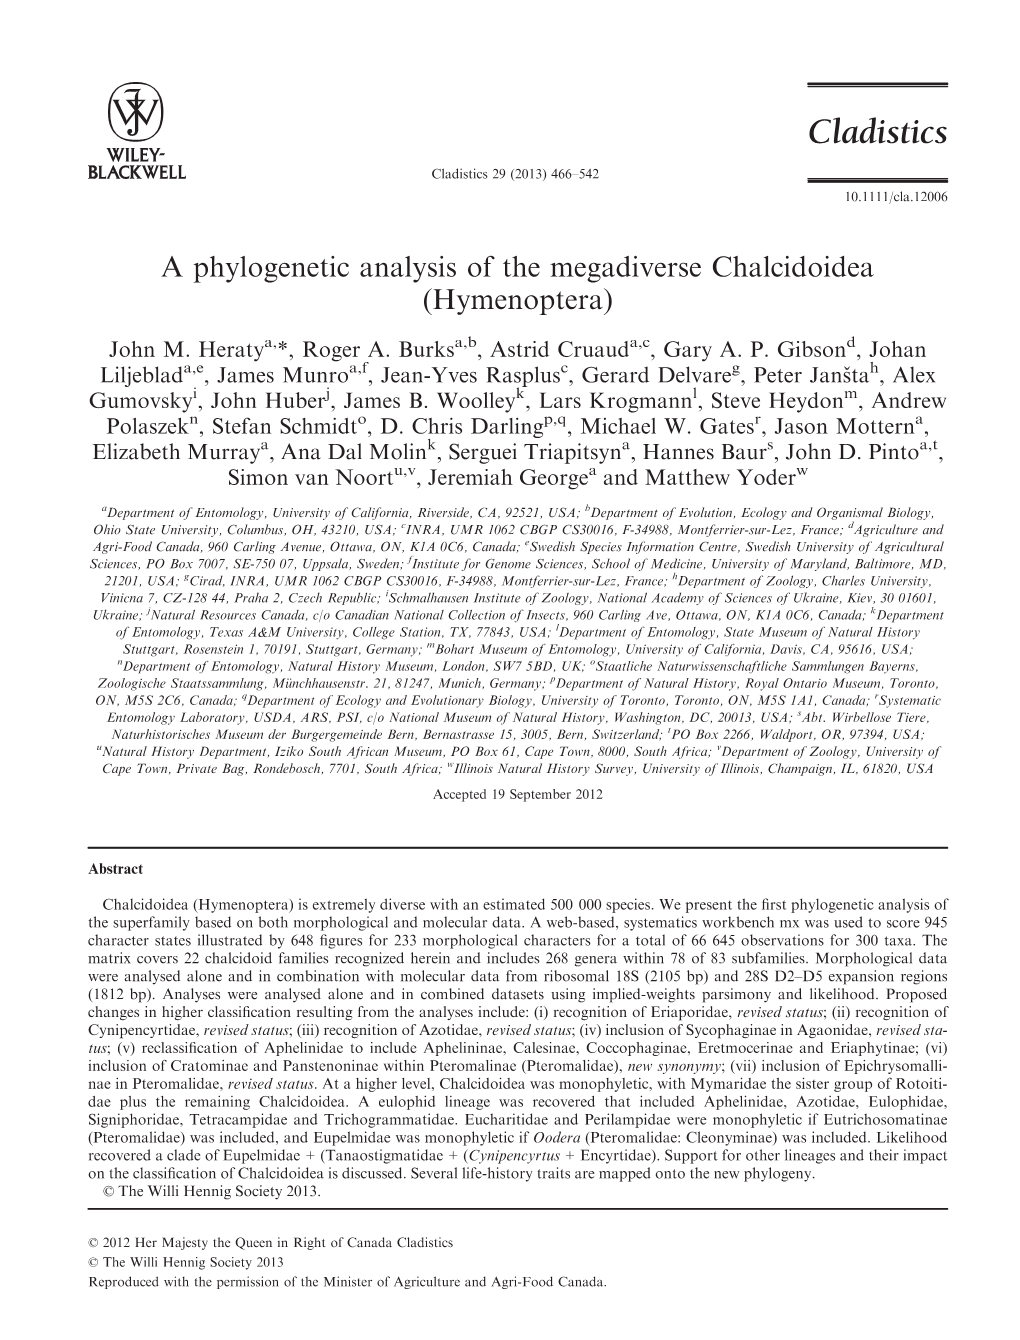 A Phylogenetic Analysis of the Megadiverse Chalcidoidea (Hymenoptera)